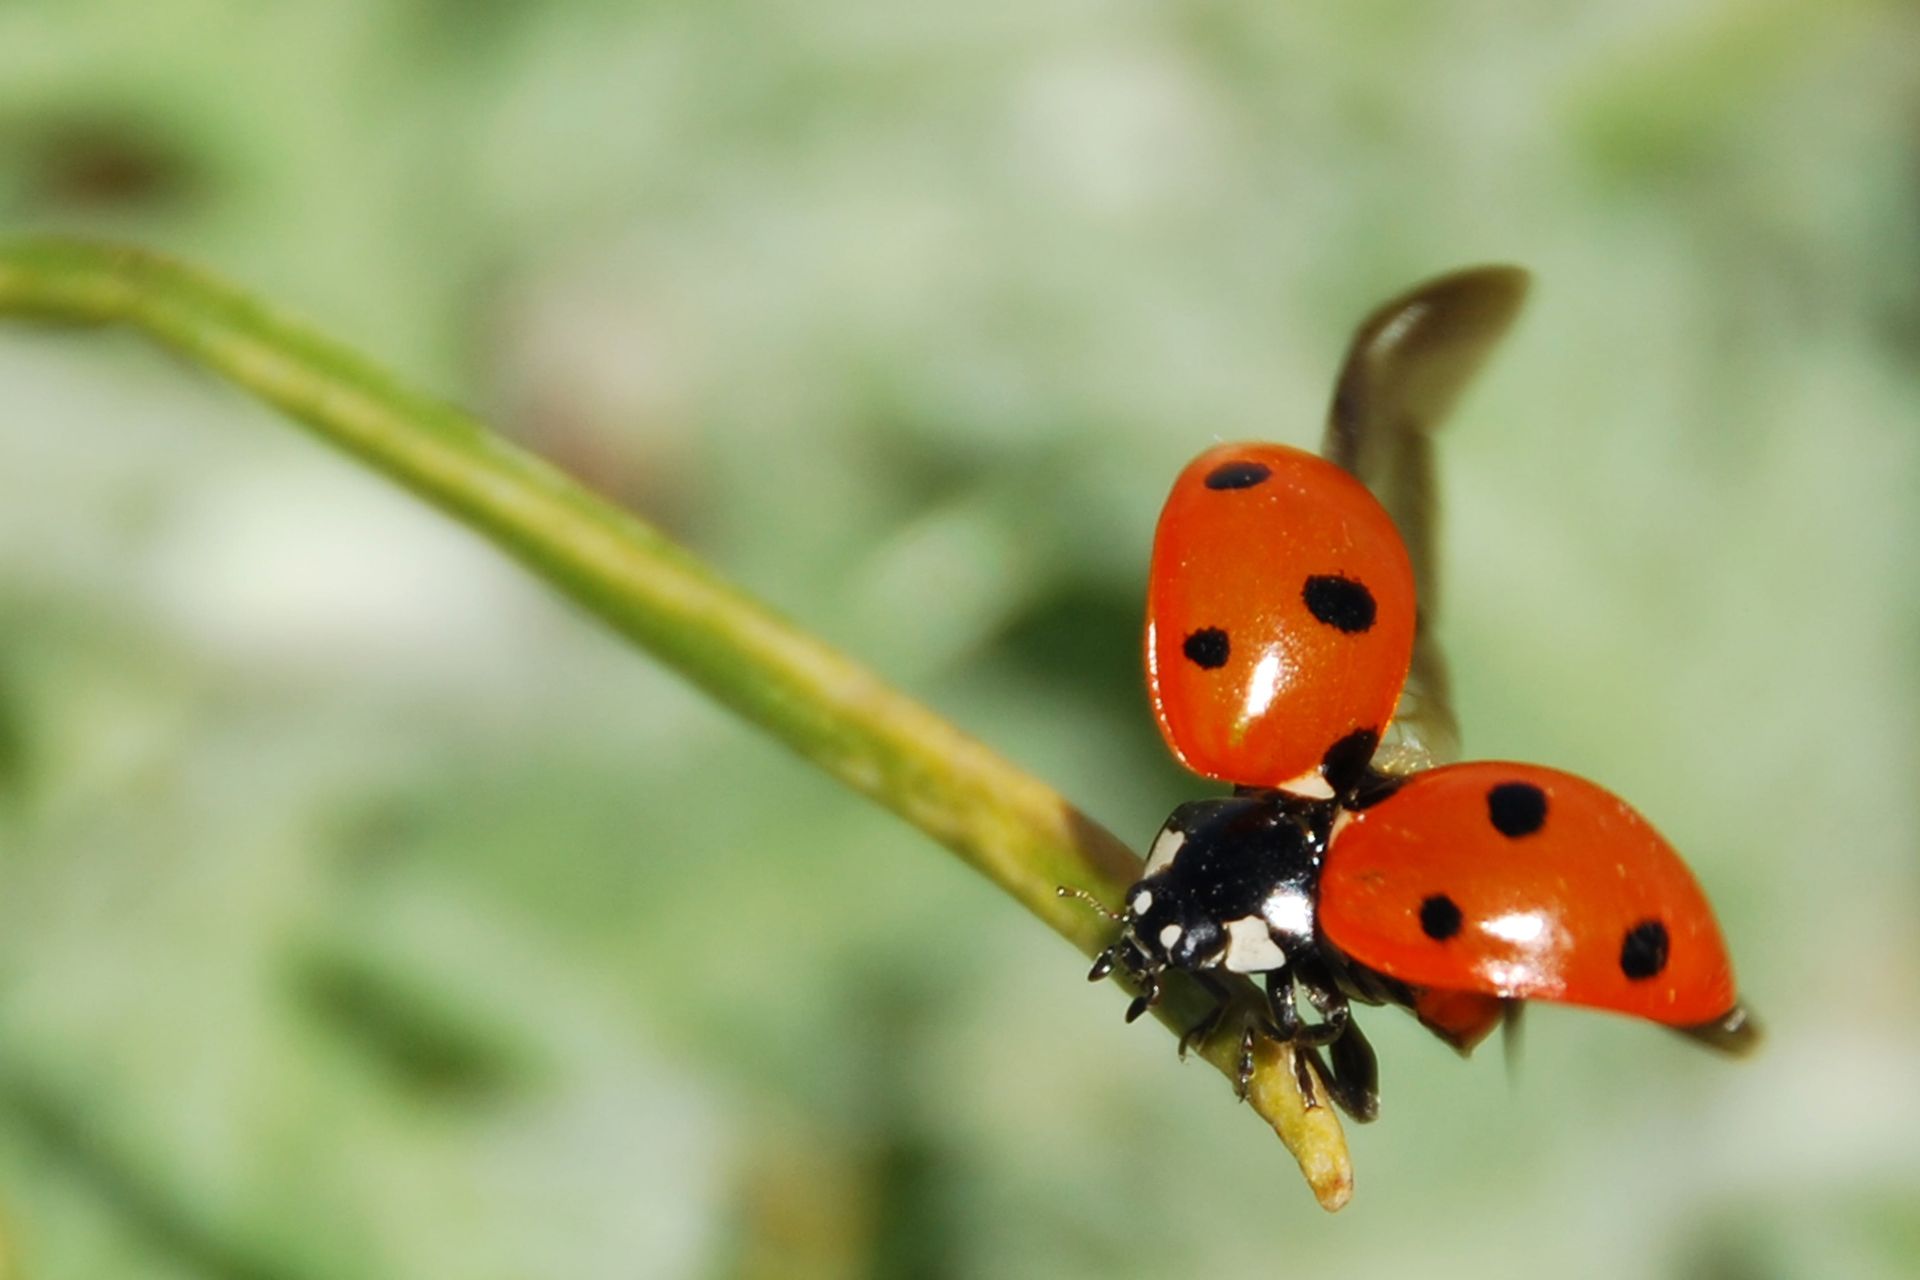 Can Pest Control Get Rid of Ladybugs?